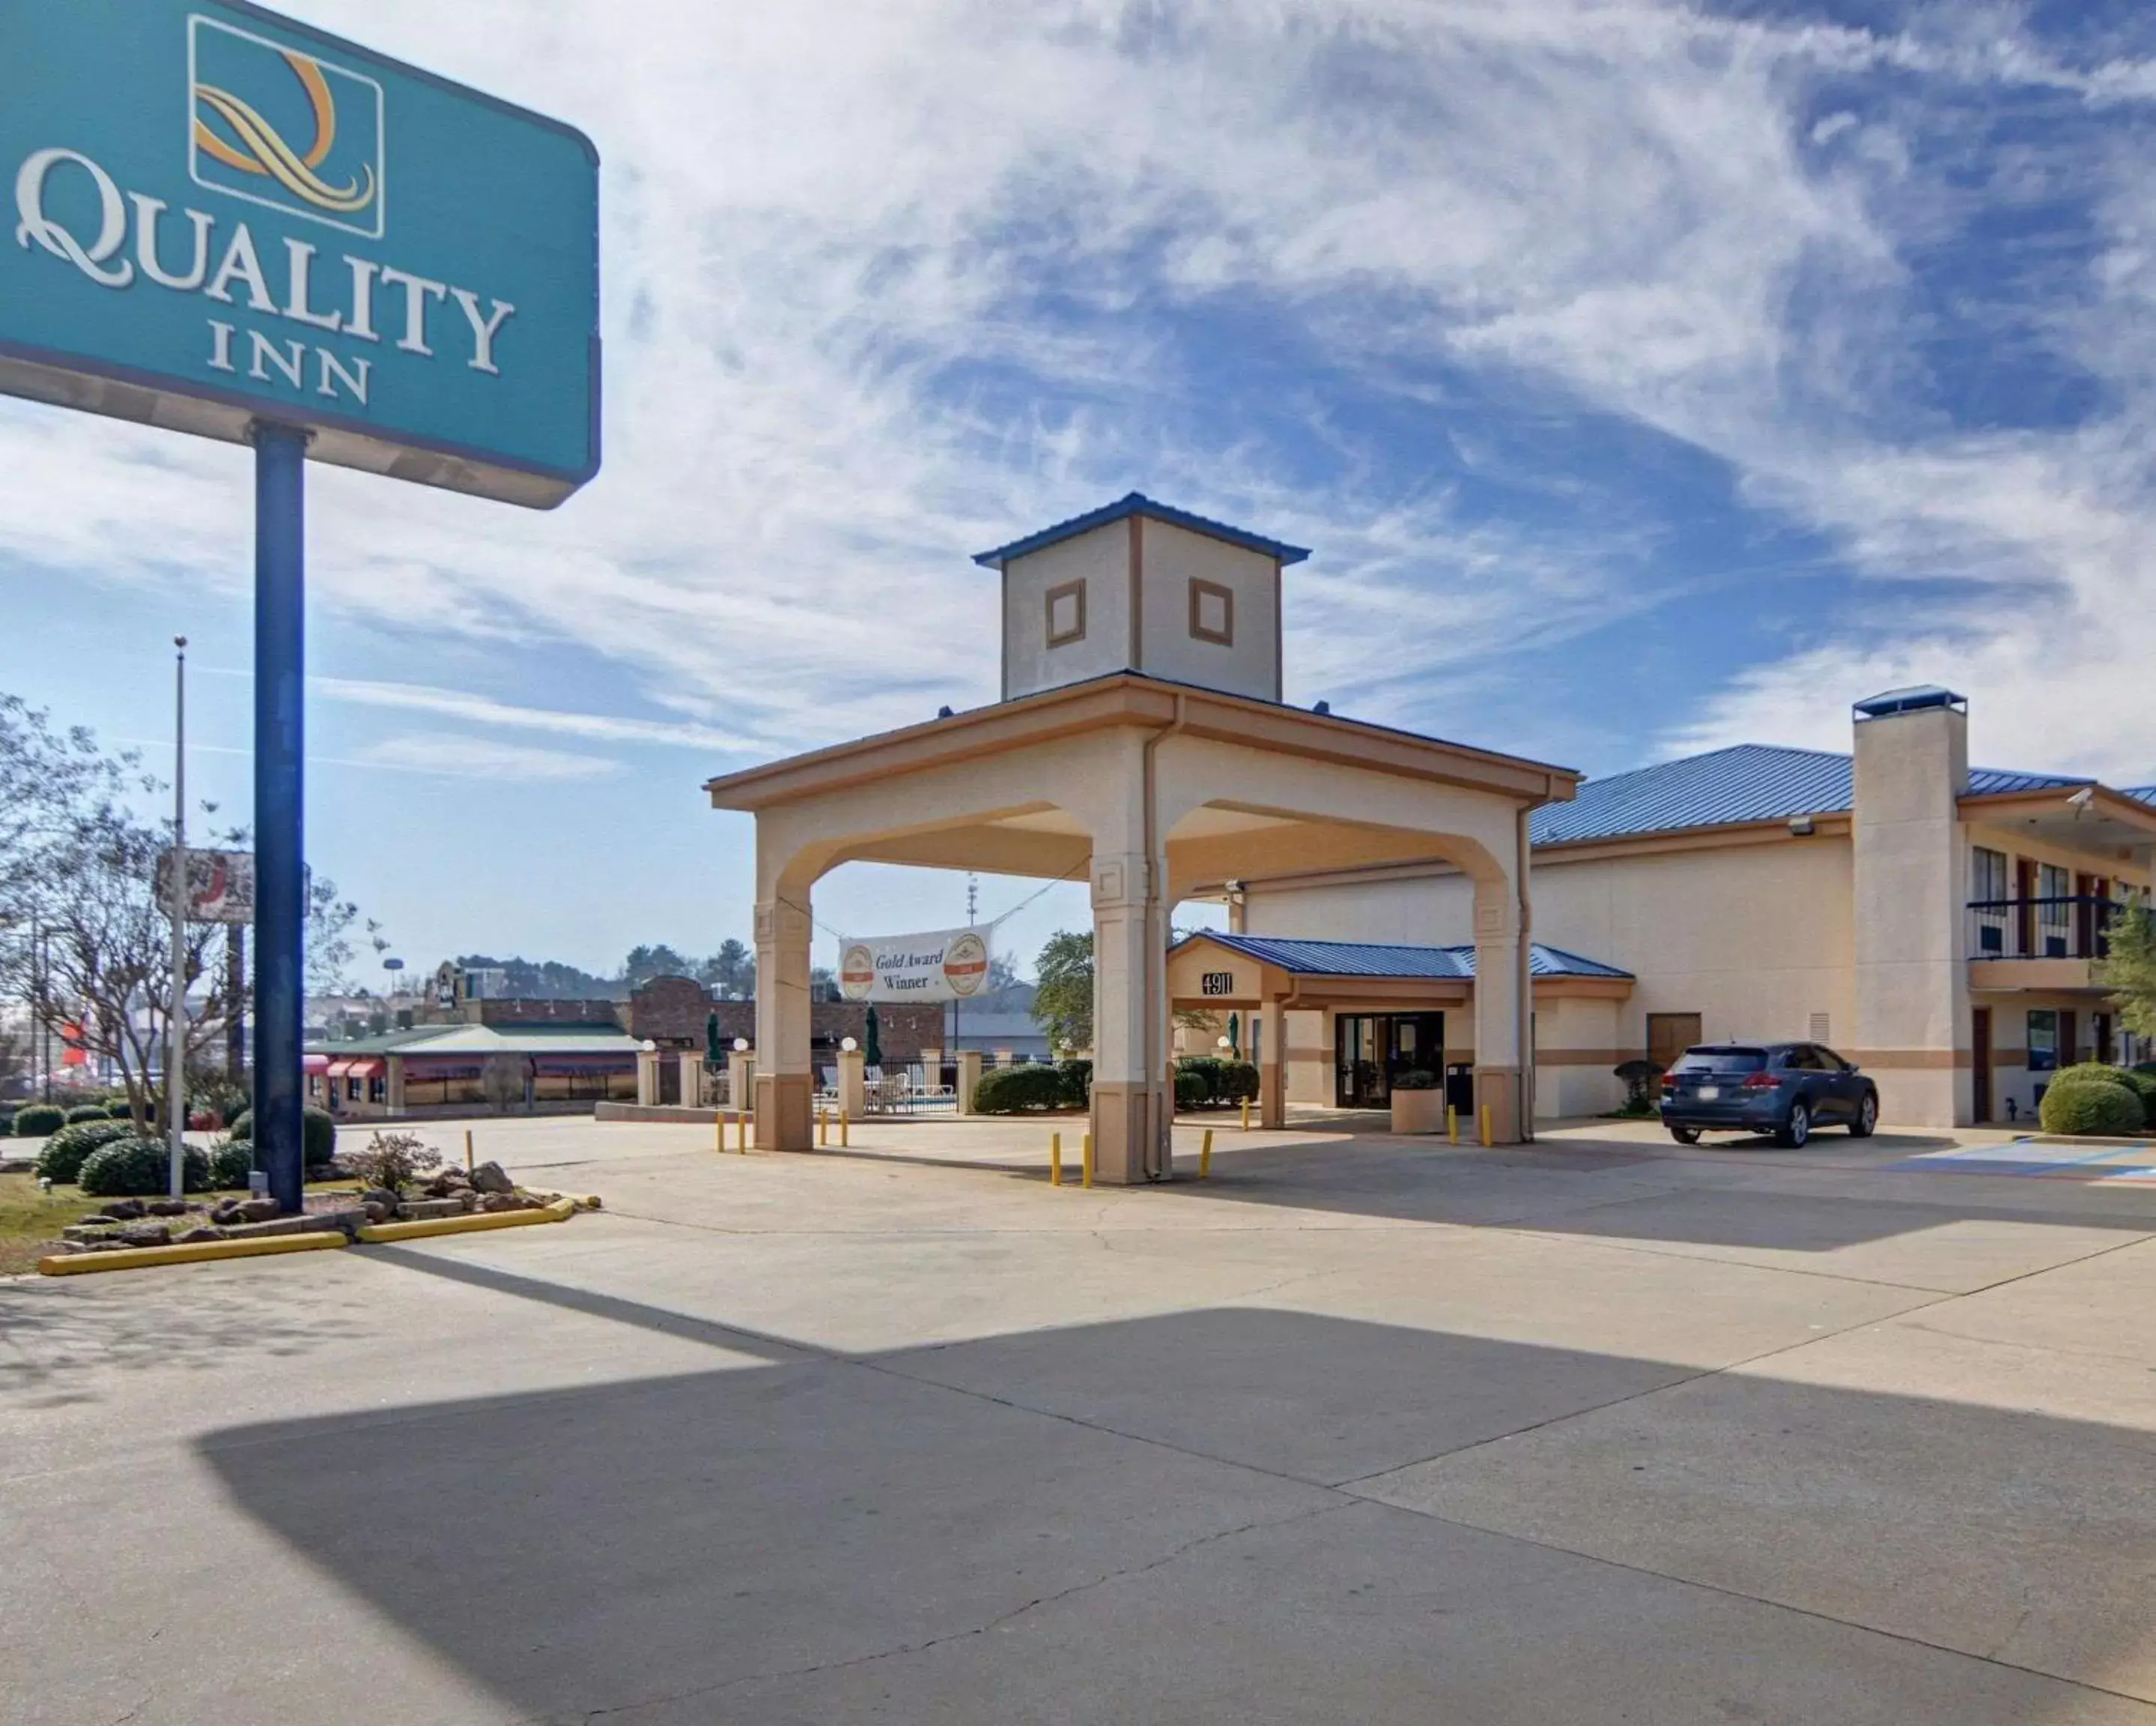 Property building in Quality Inn Marshall